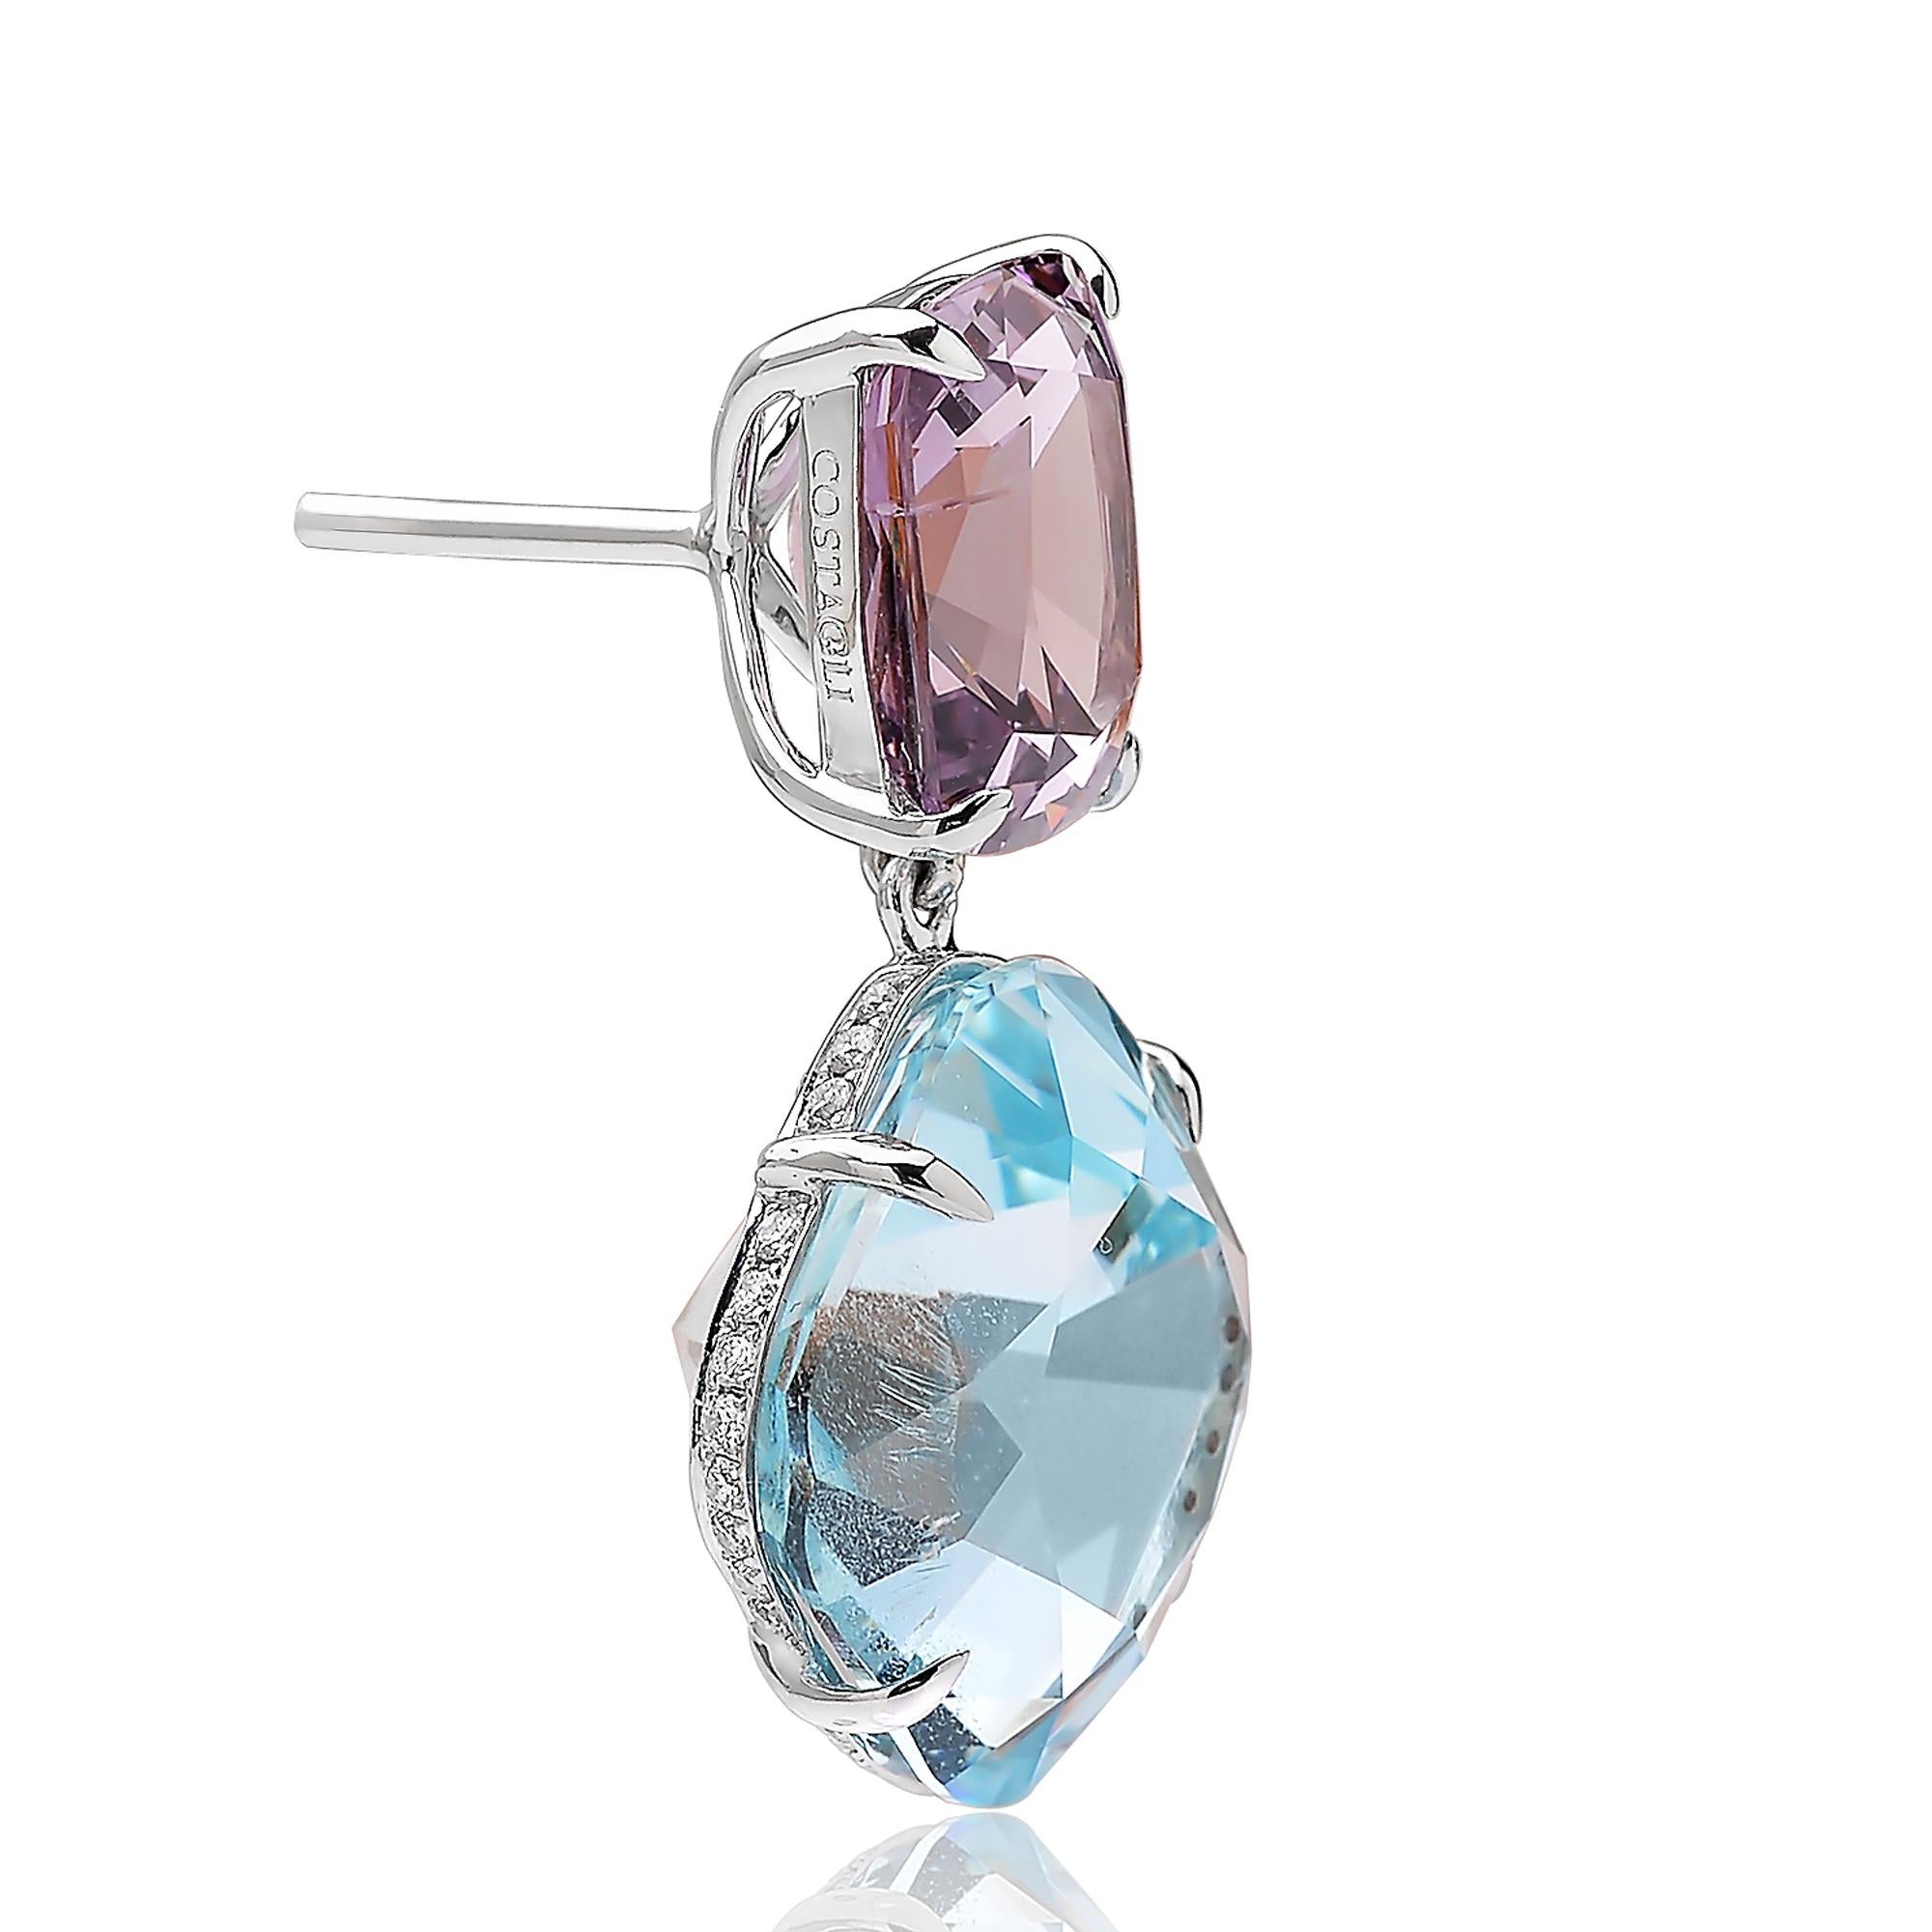 One of a kind aquamarine and spinel earrings with pave-set round, brilliant diamonds set in 18kt gold. 
 
Old World aquamarine cushion cut proportioned with very modern spinel cushion cut facets alignment make this one of a kind pair of earrings one